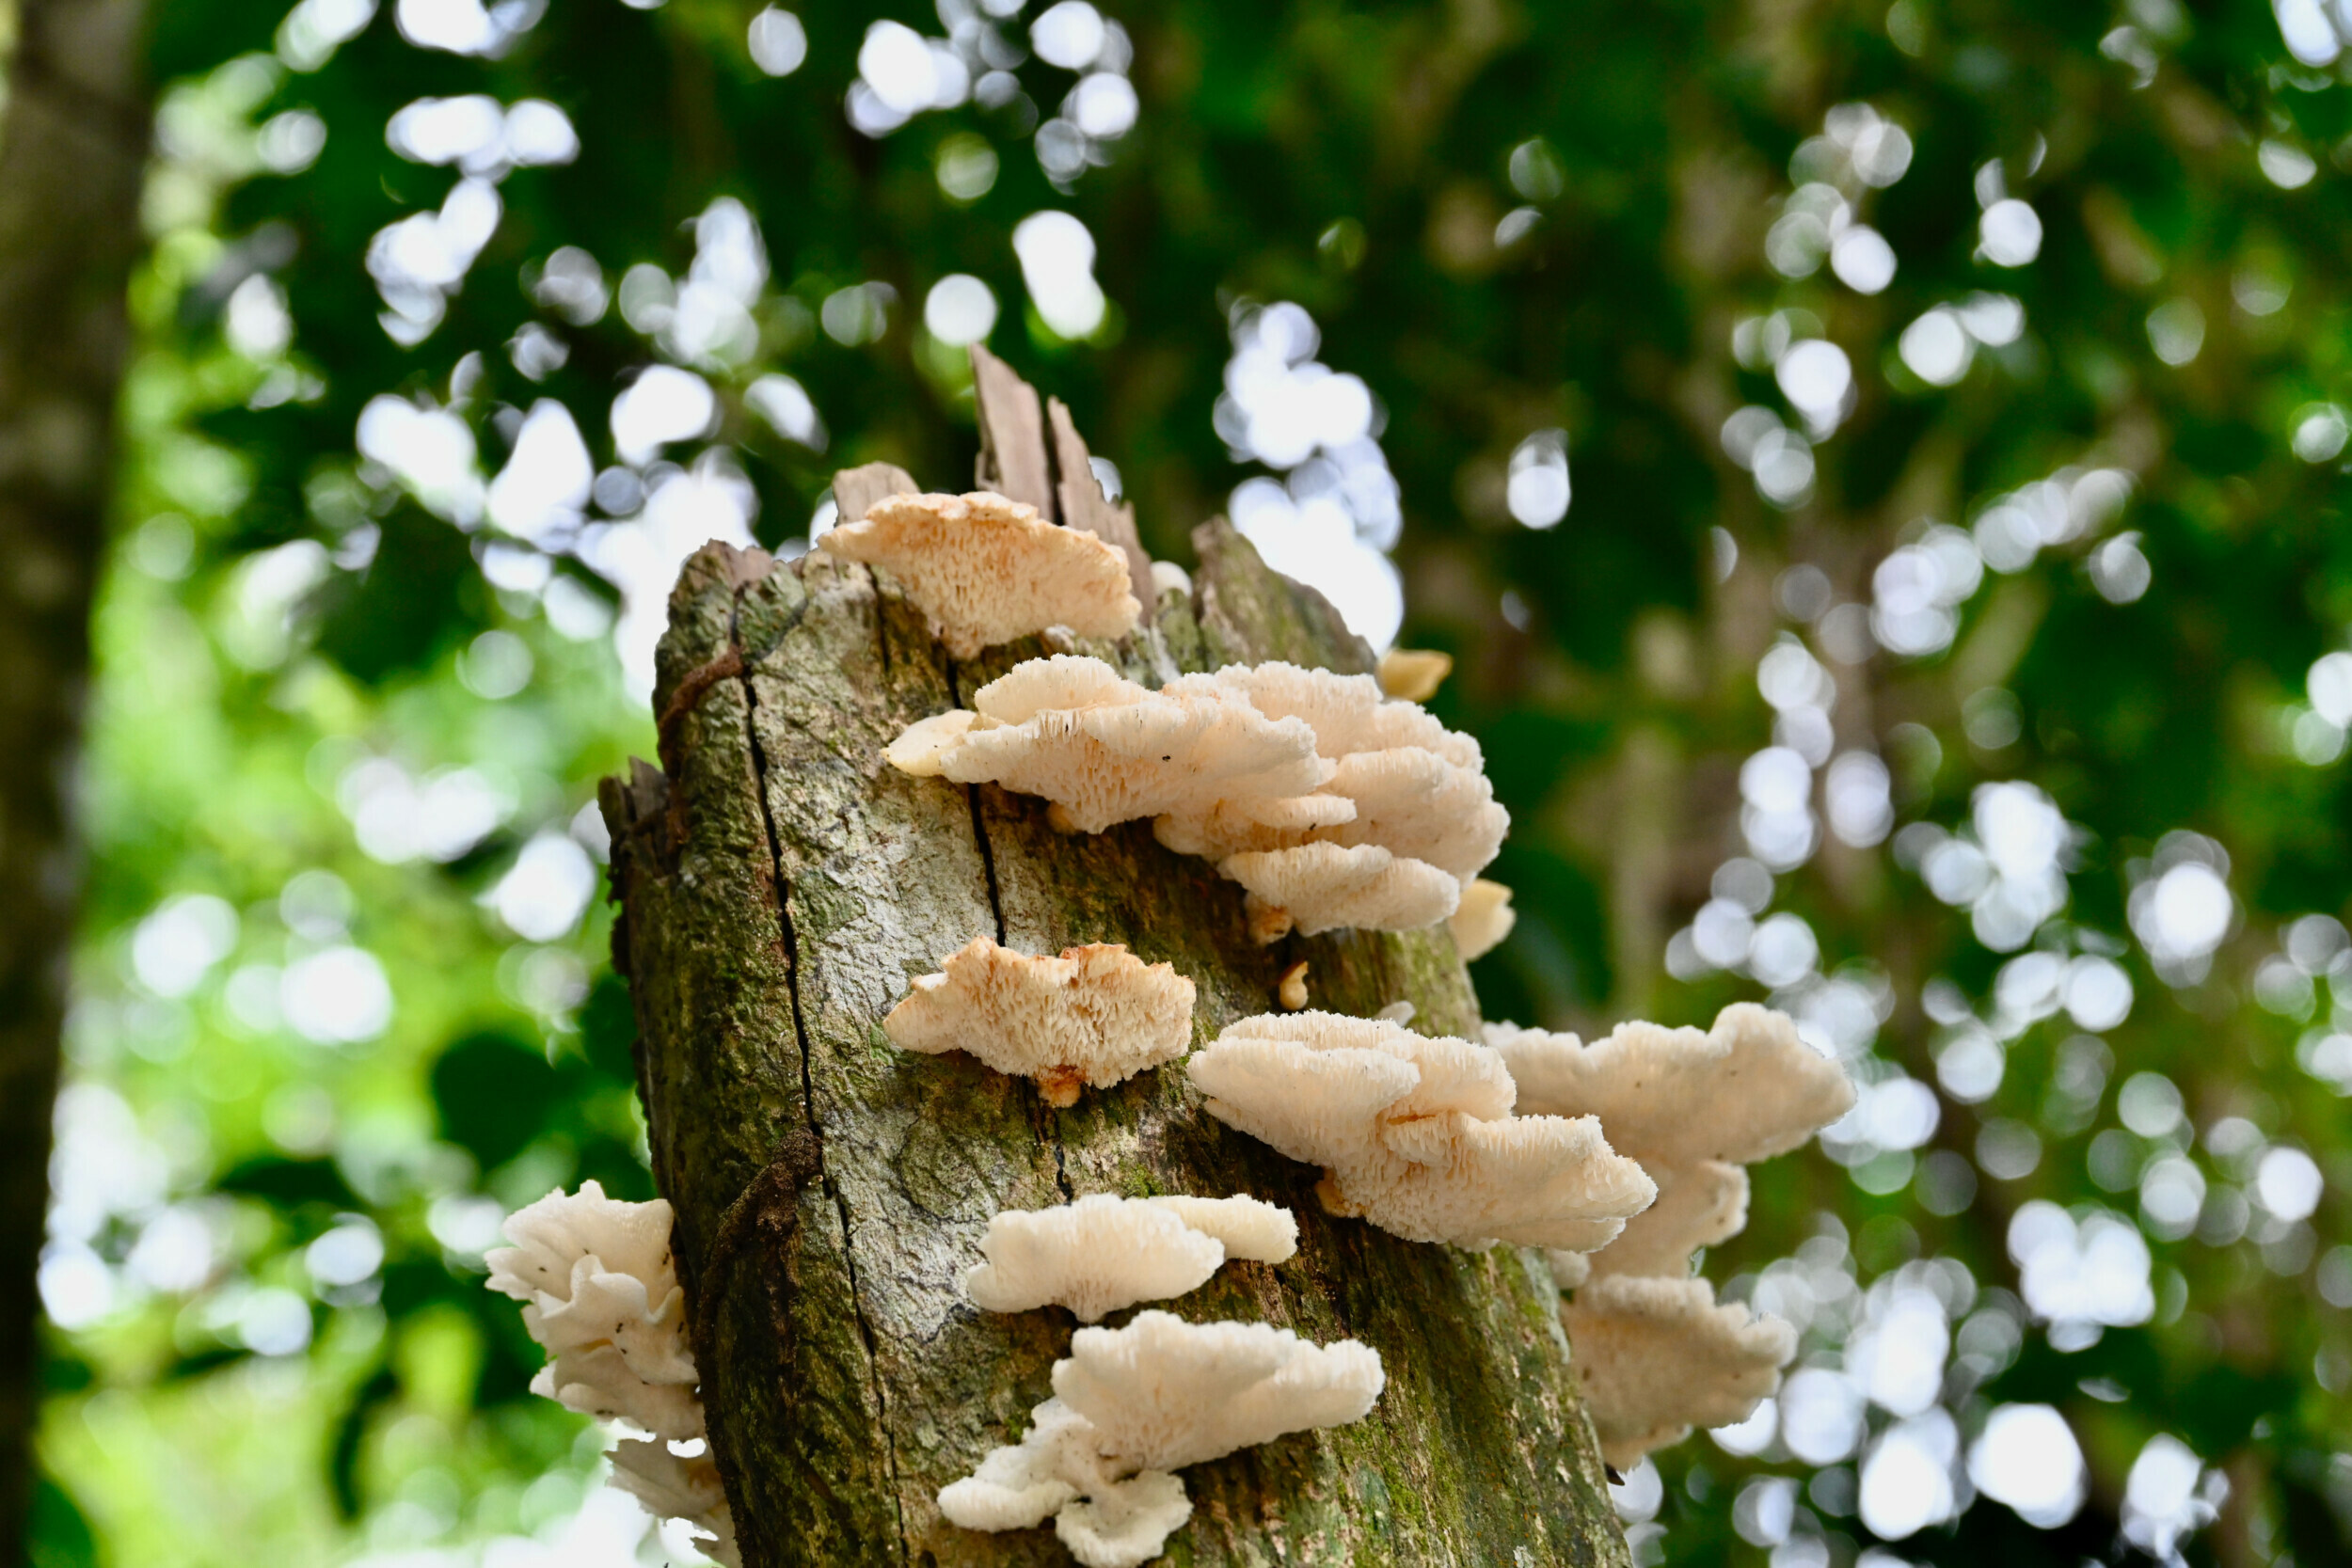 Close-up of tree fungi in Manuel Antonio National Park, showcasing the delicate textures against a bokeh background.